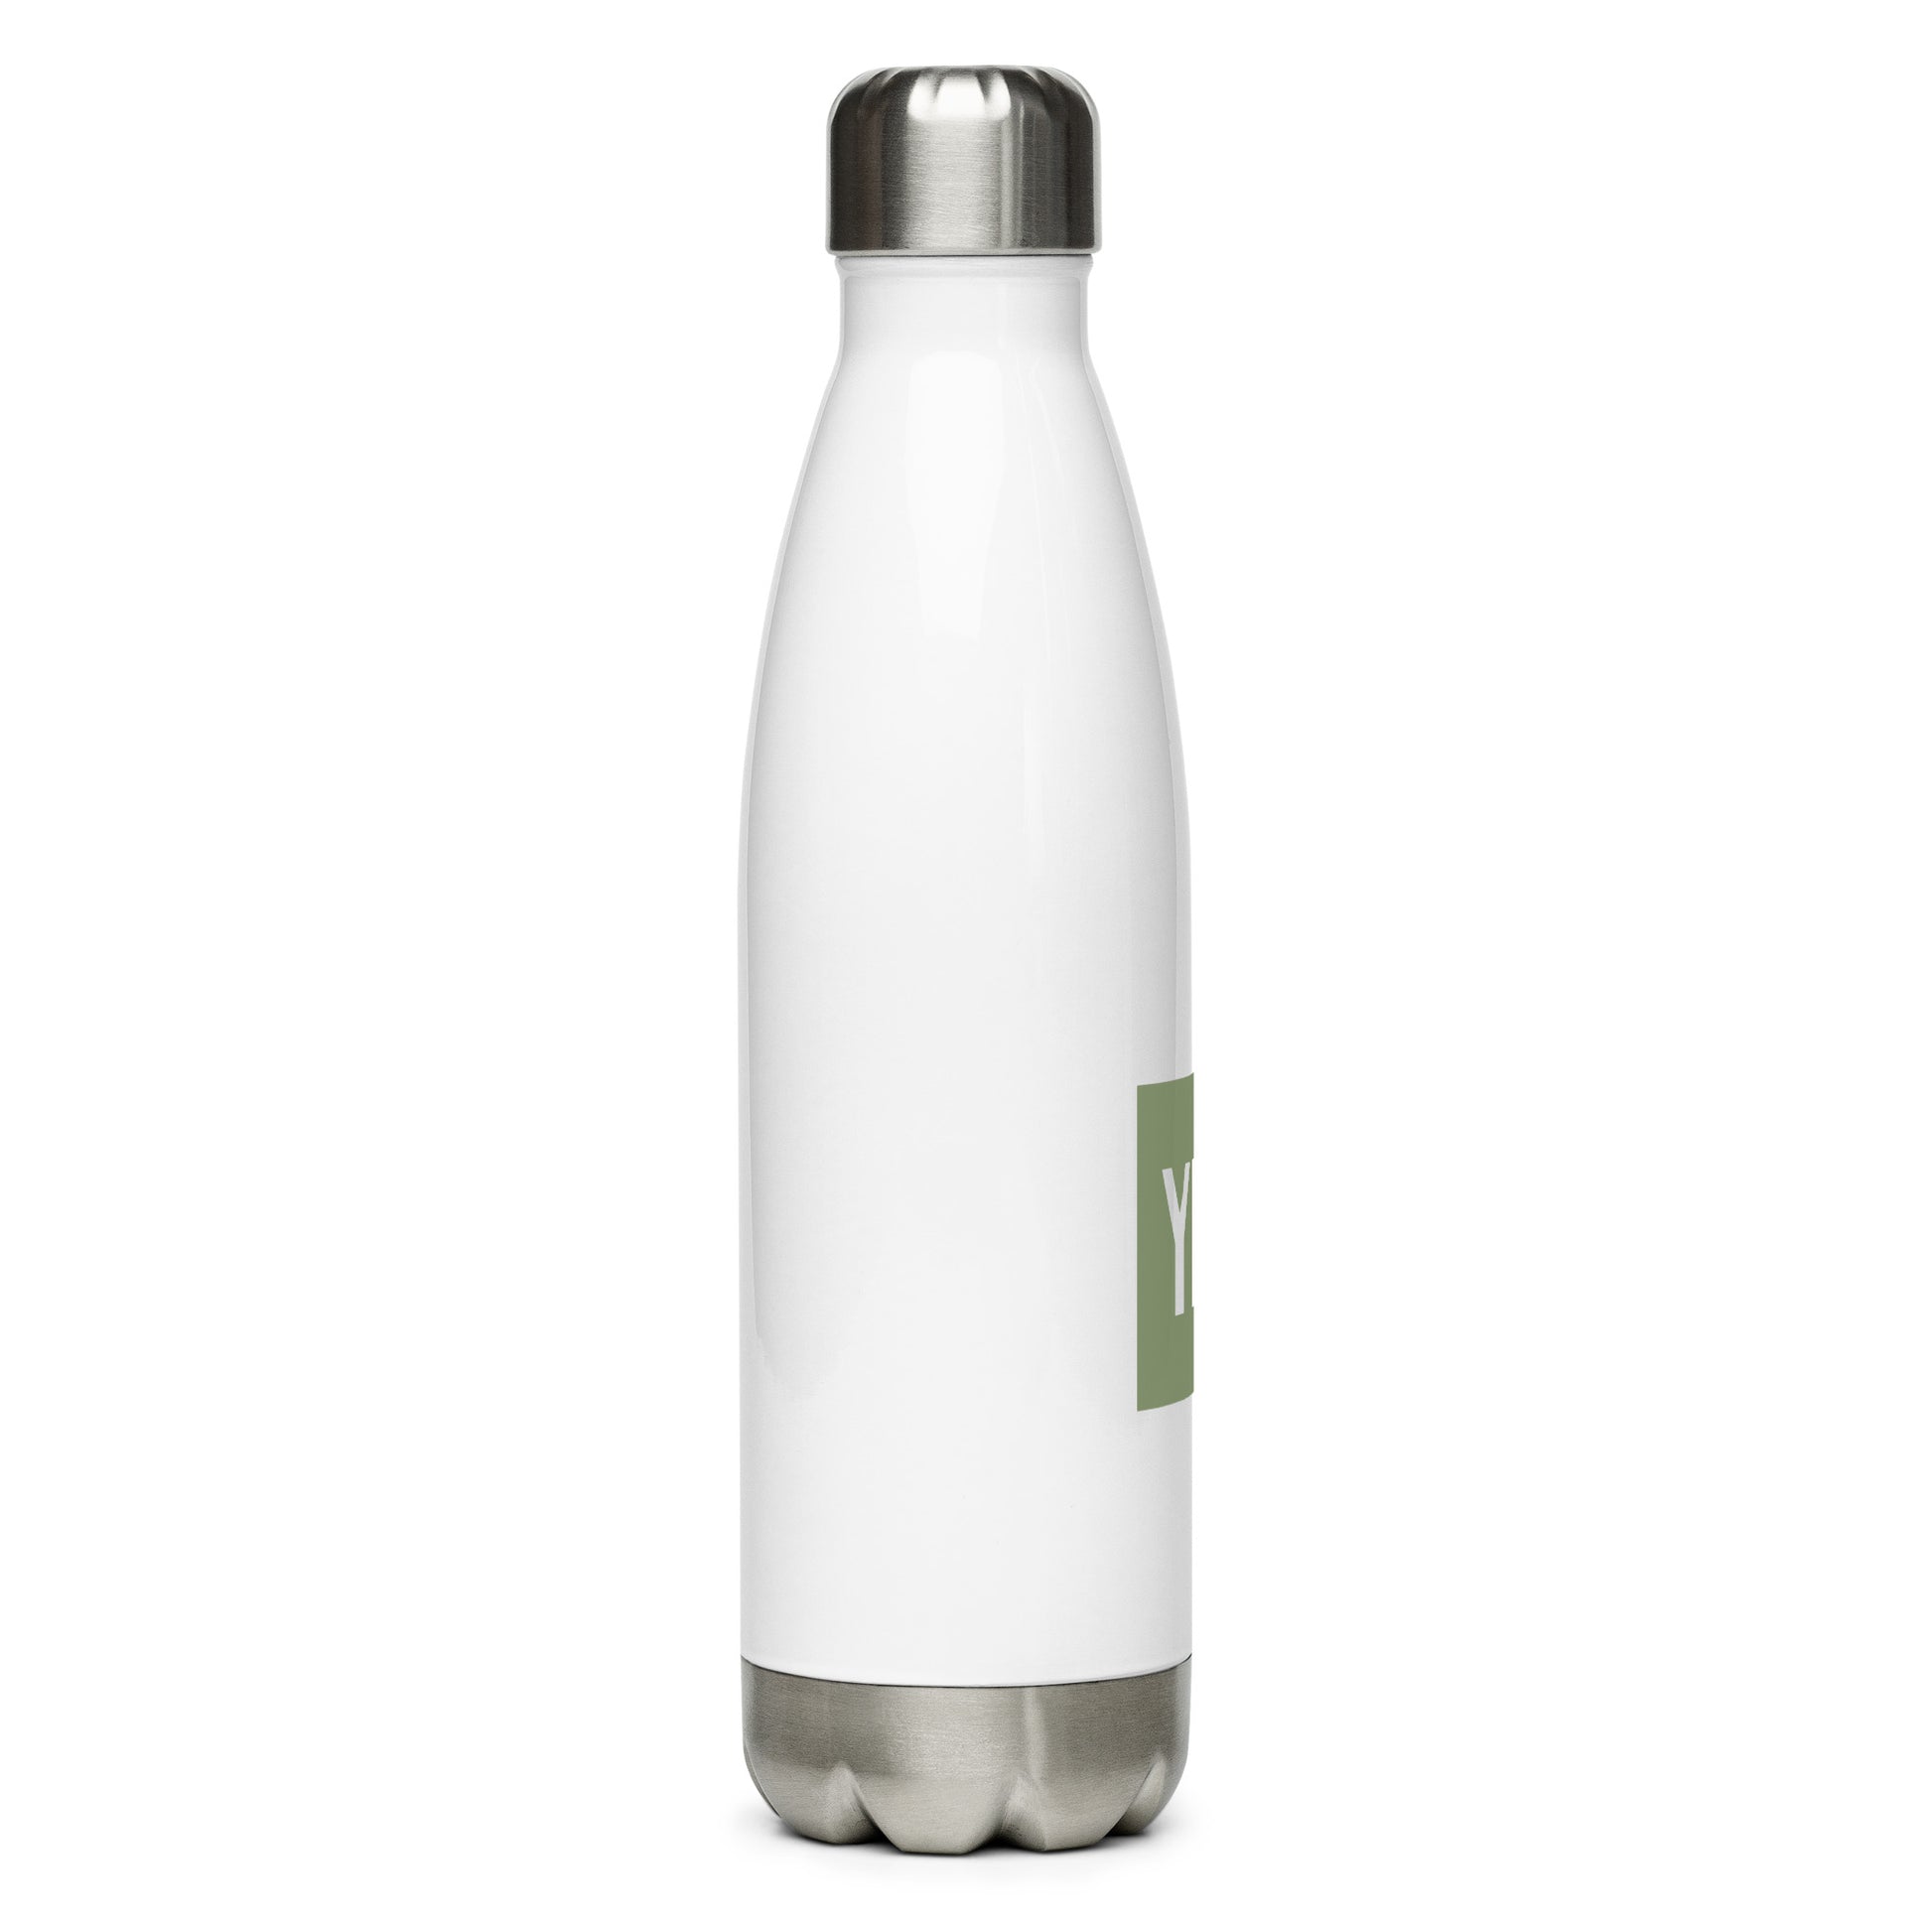 Aviation Gift Water Bottle - Camo Green • YMM Fort McMurray • YHM Designs - Image 07